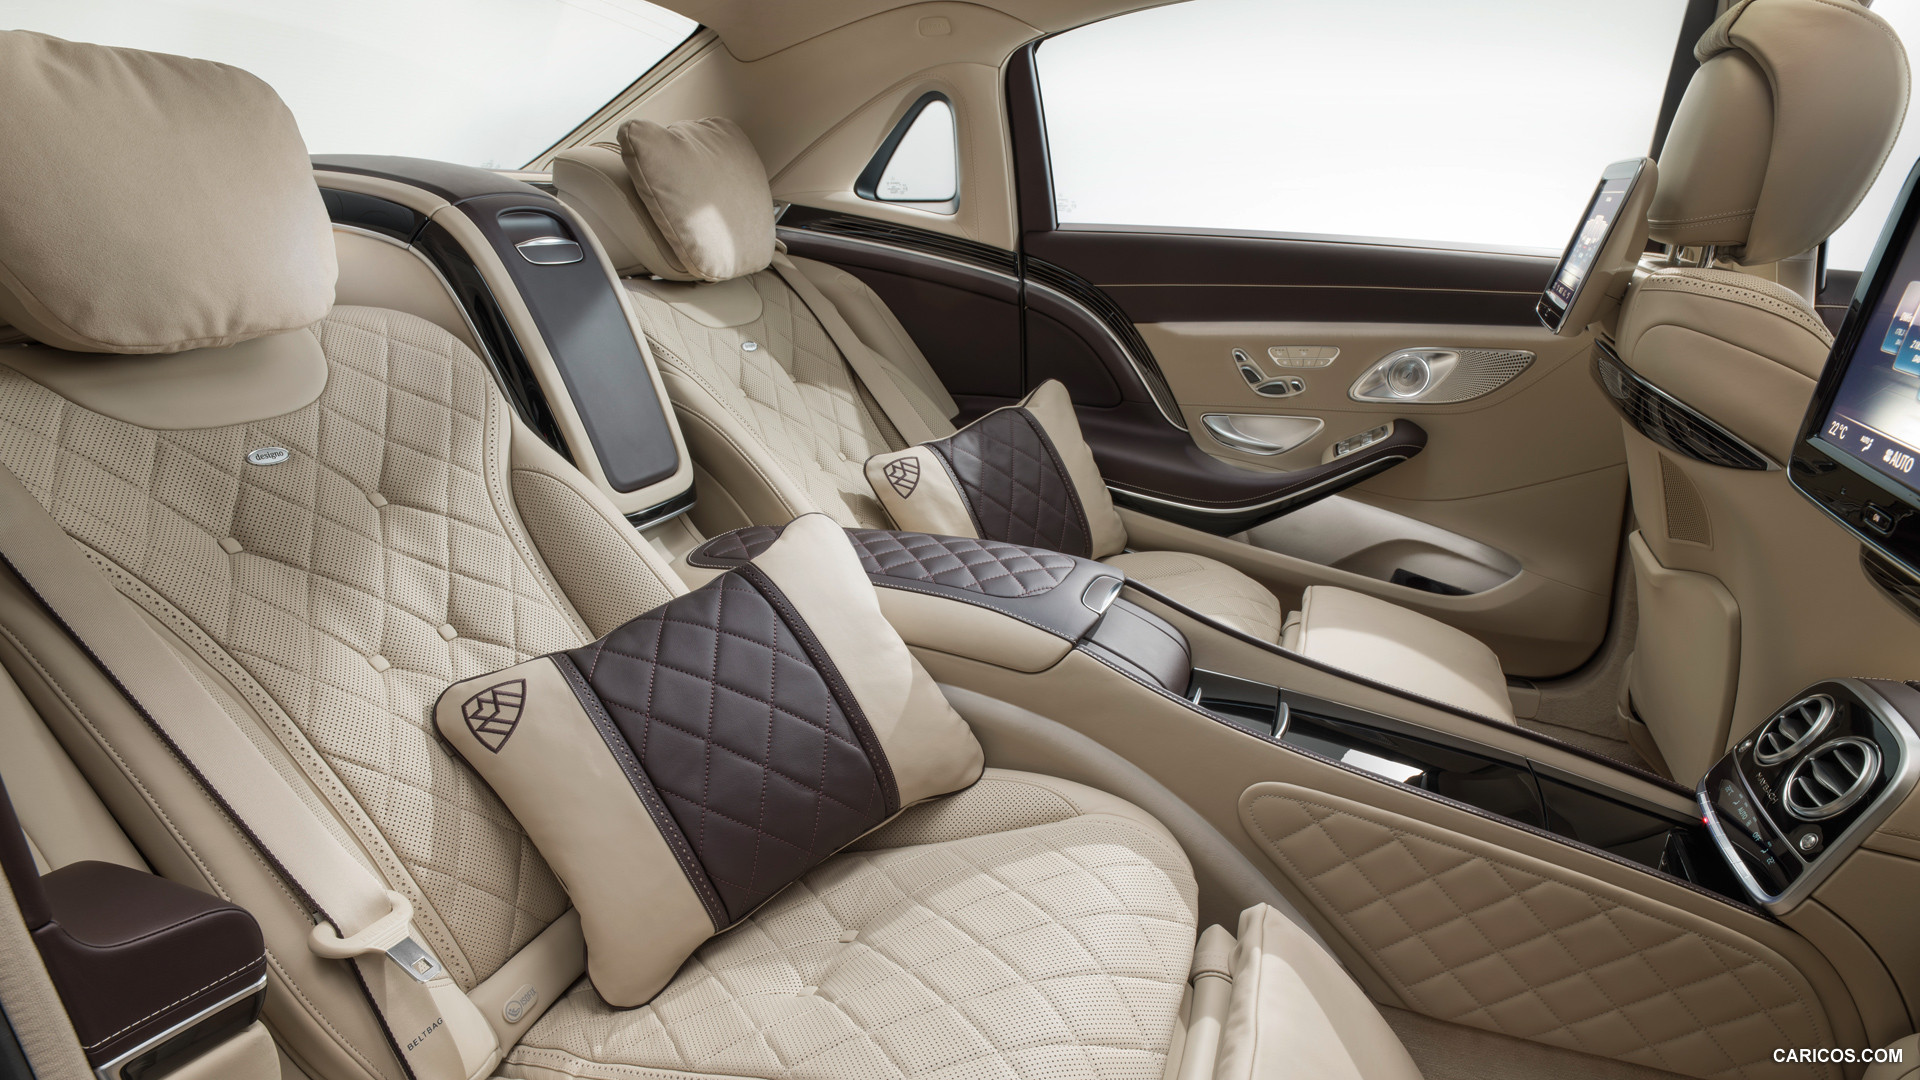 2016 Mercedes-Maybach S-Class S600 - Interior Rear Seats, #47 of 225